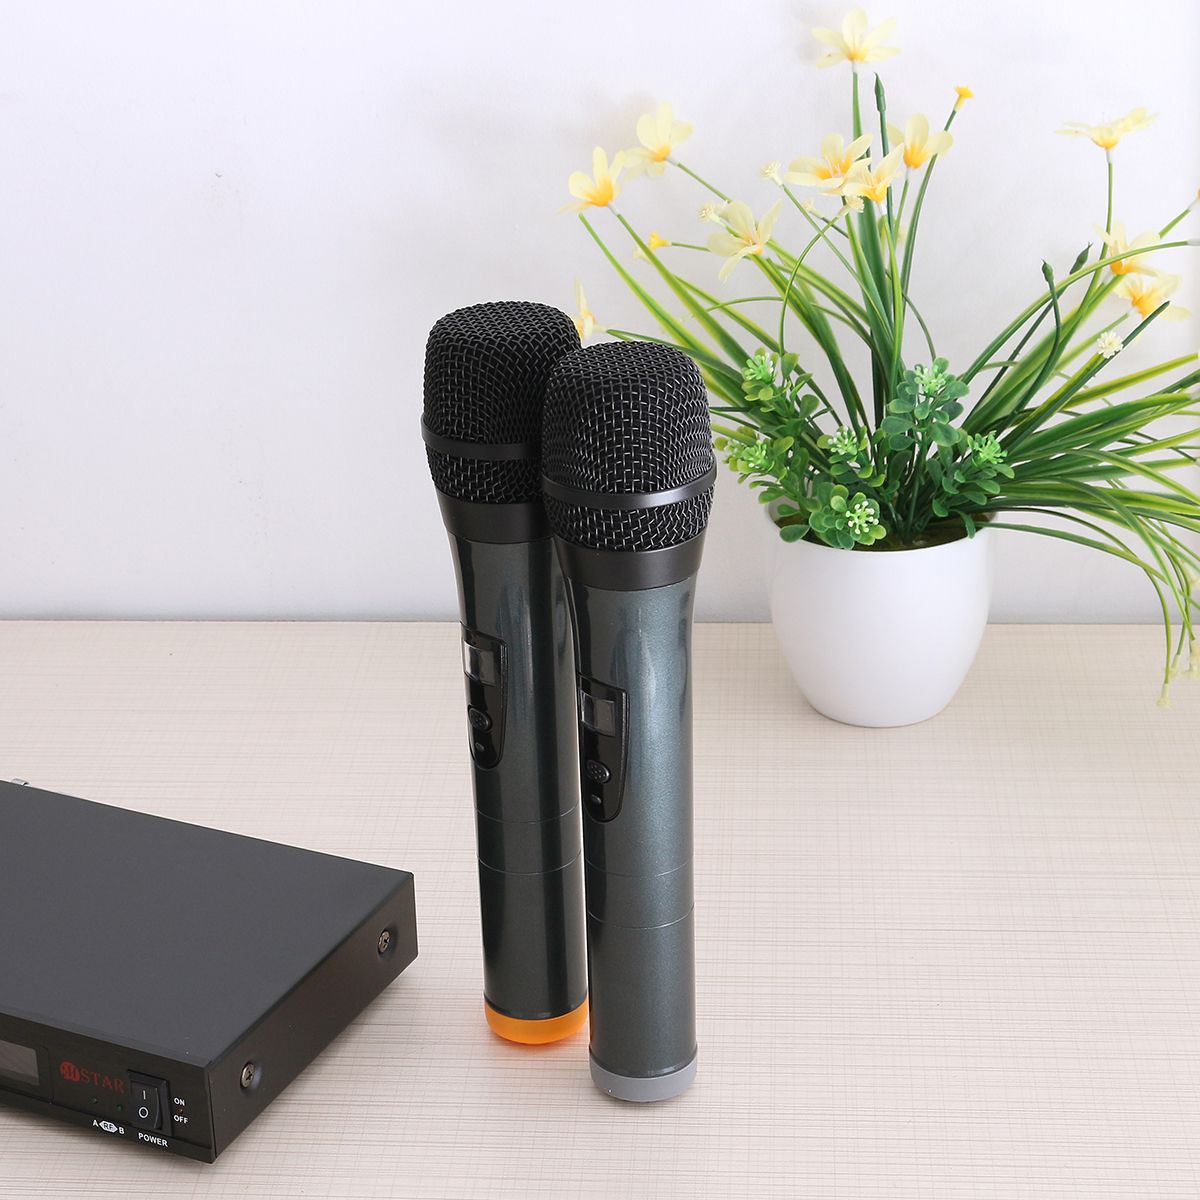 LED-Display-2-Channel-Karaoke-Wireless-Handheld-Microphone-Cordless-Dual-Mic-System-with-Receiver-1529927